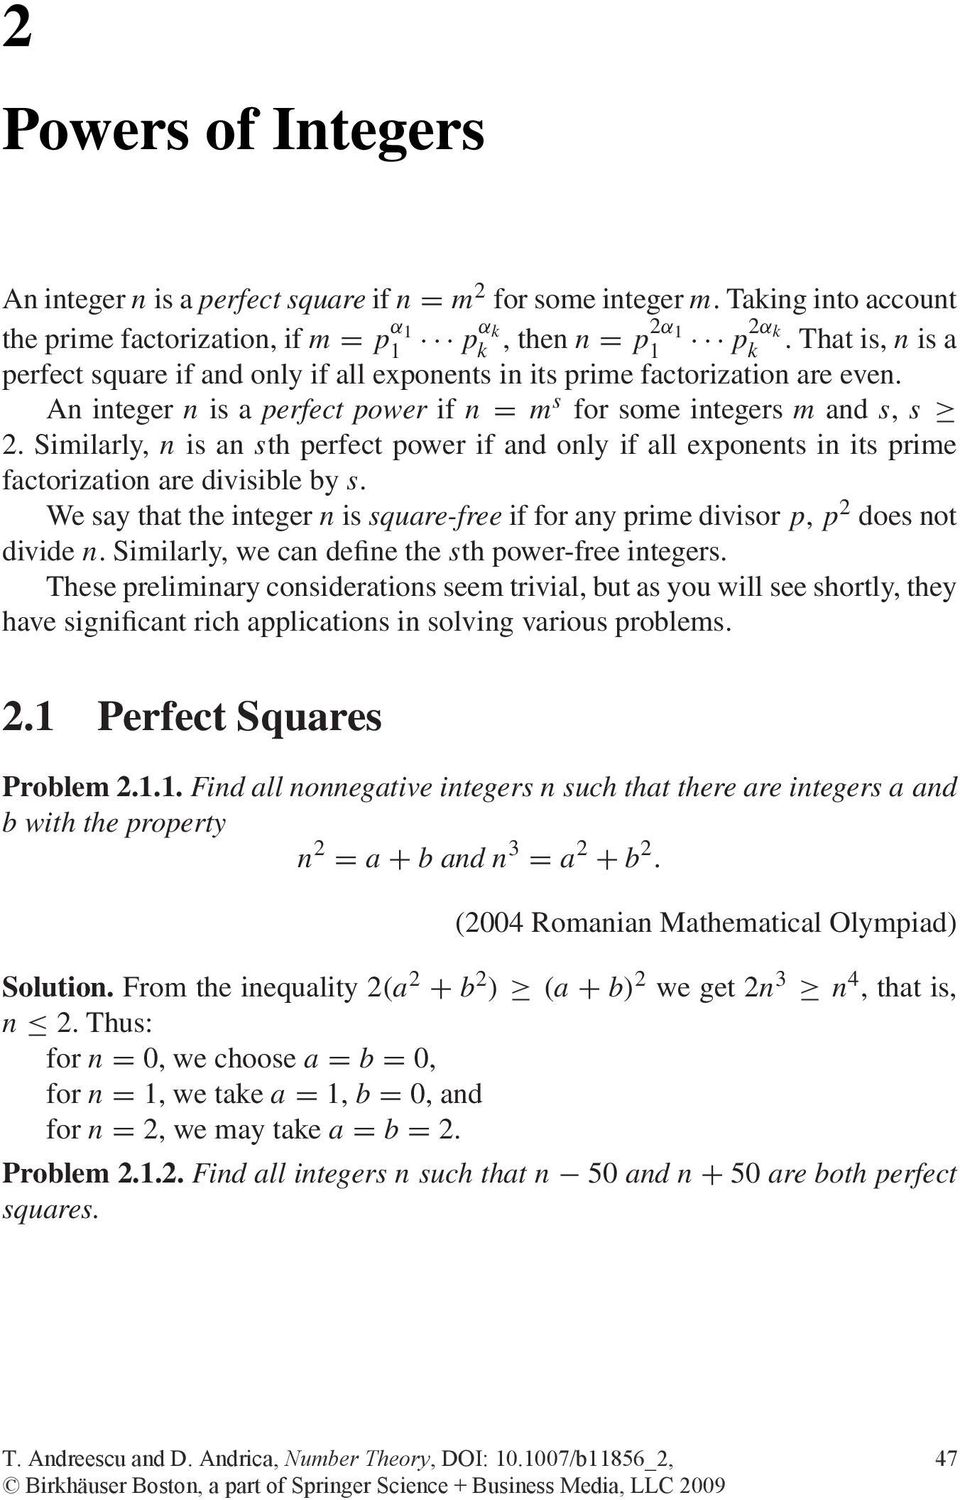 Similarly, n is an sth perfect power if and only if all exponents in its prime factorization are divisible by s.